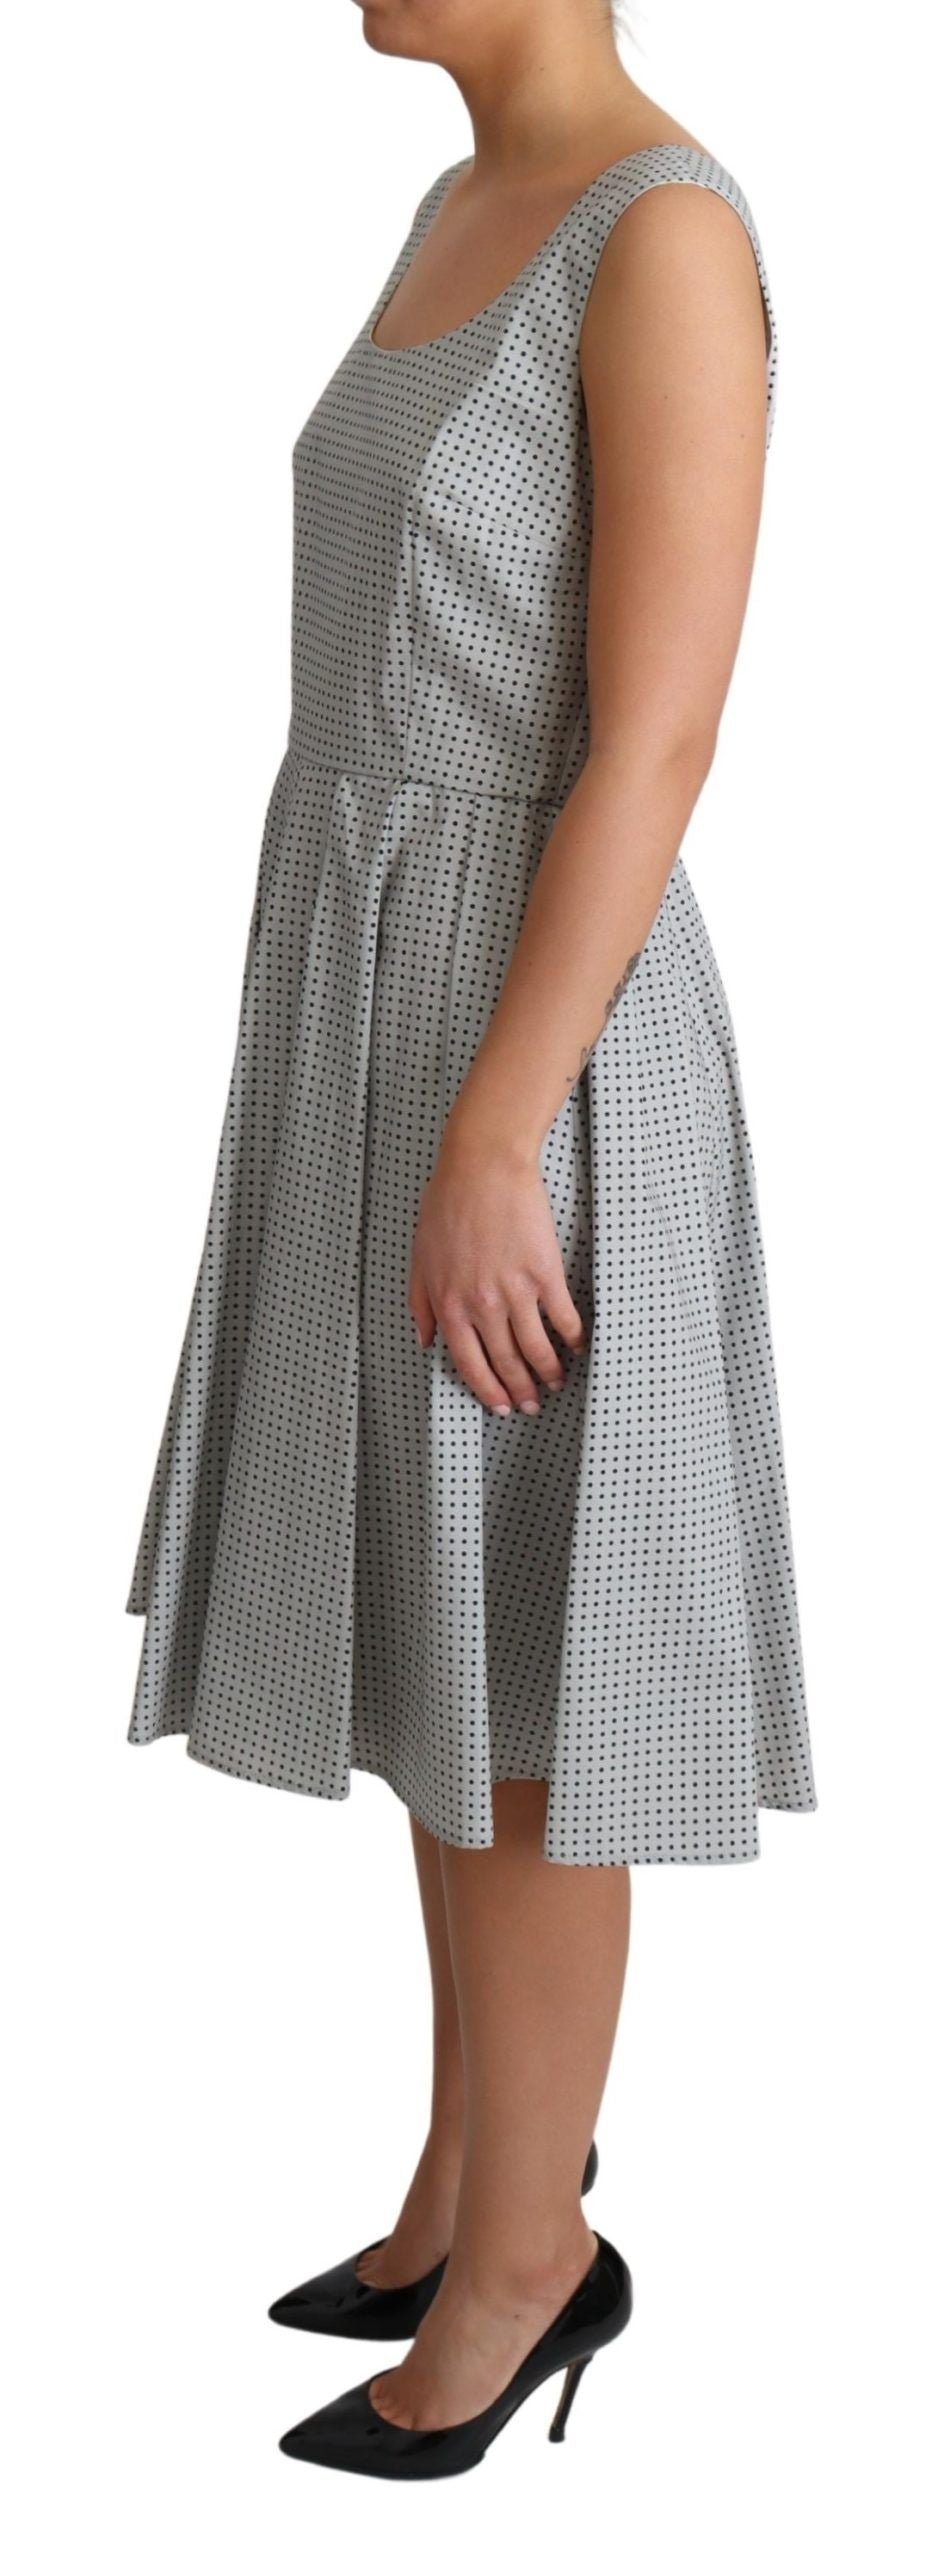 Gray Polka Dotted Cotton A-Line Dress - Designed by Dolce & Gabbana Available to Buy at a Discounted Price on Moon Behind The Hill Online Designer Discount Store